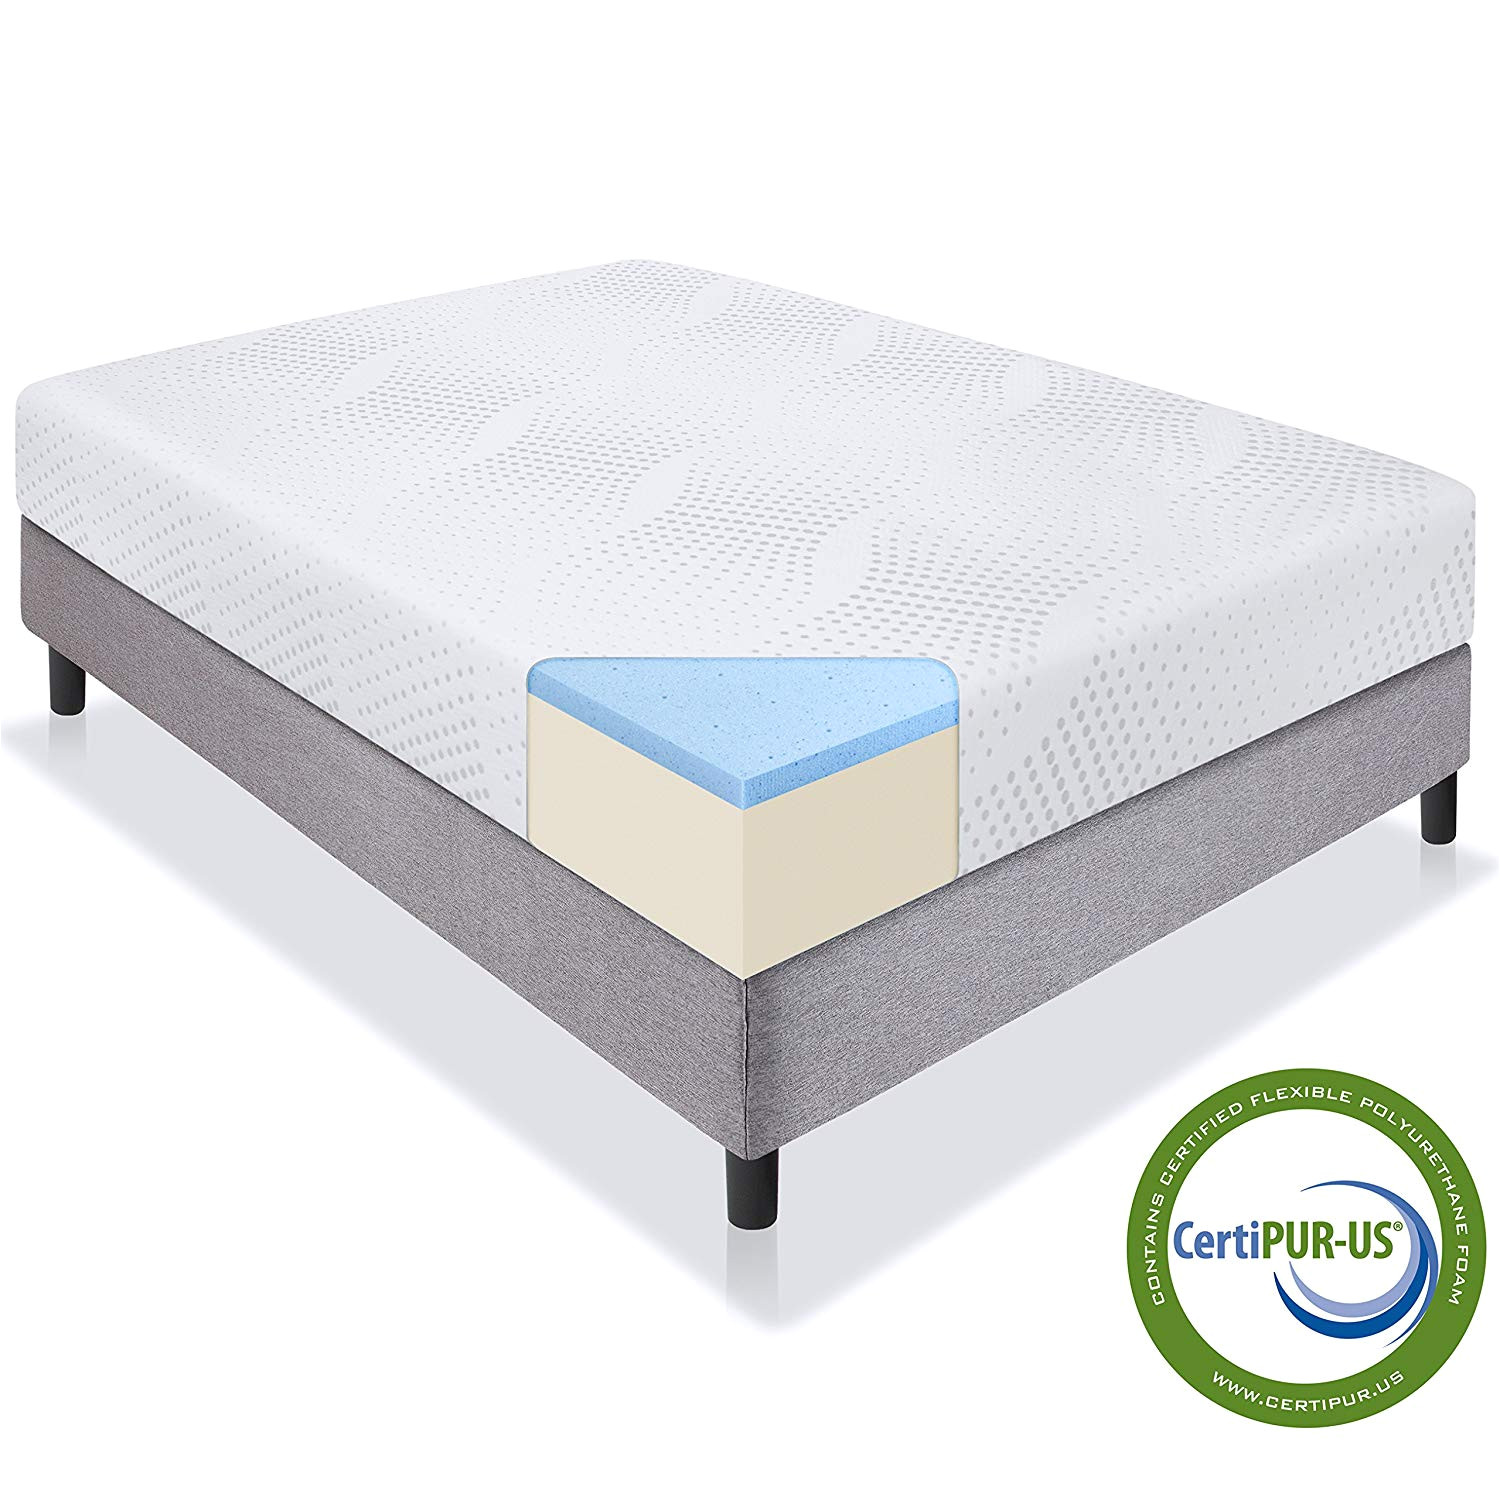 amazon com best choice products 10in queen size dual layered gel memory foam mattress w certipur us certified foam home kitchen